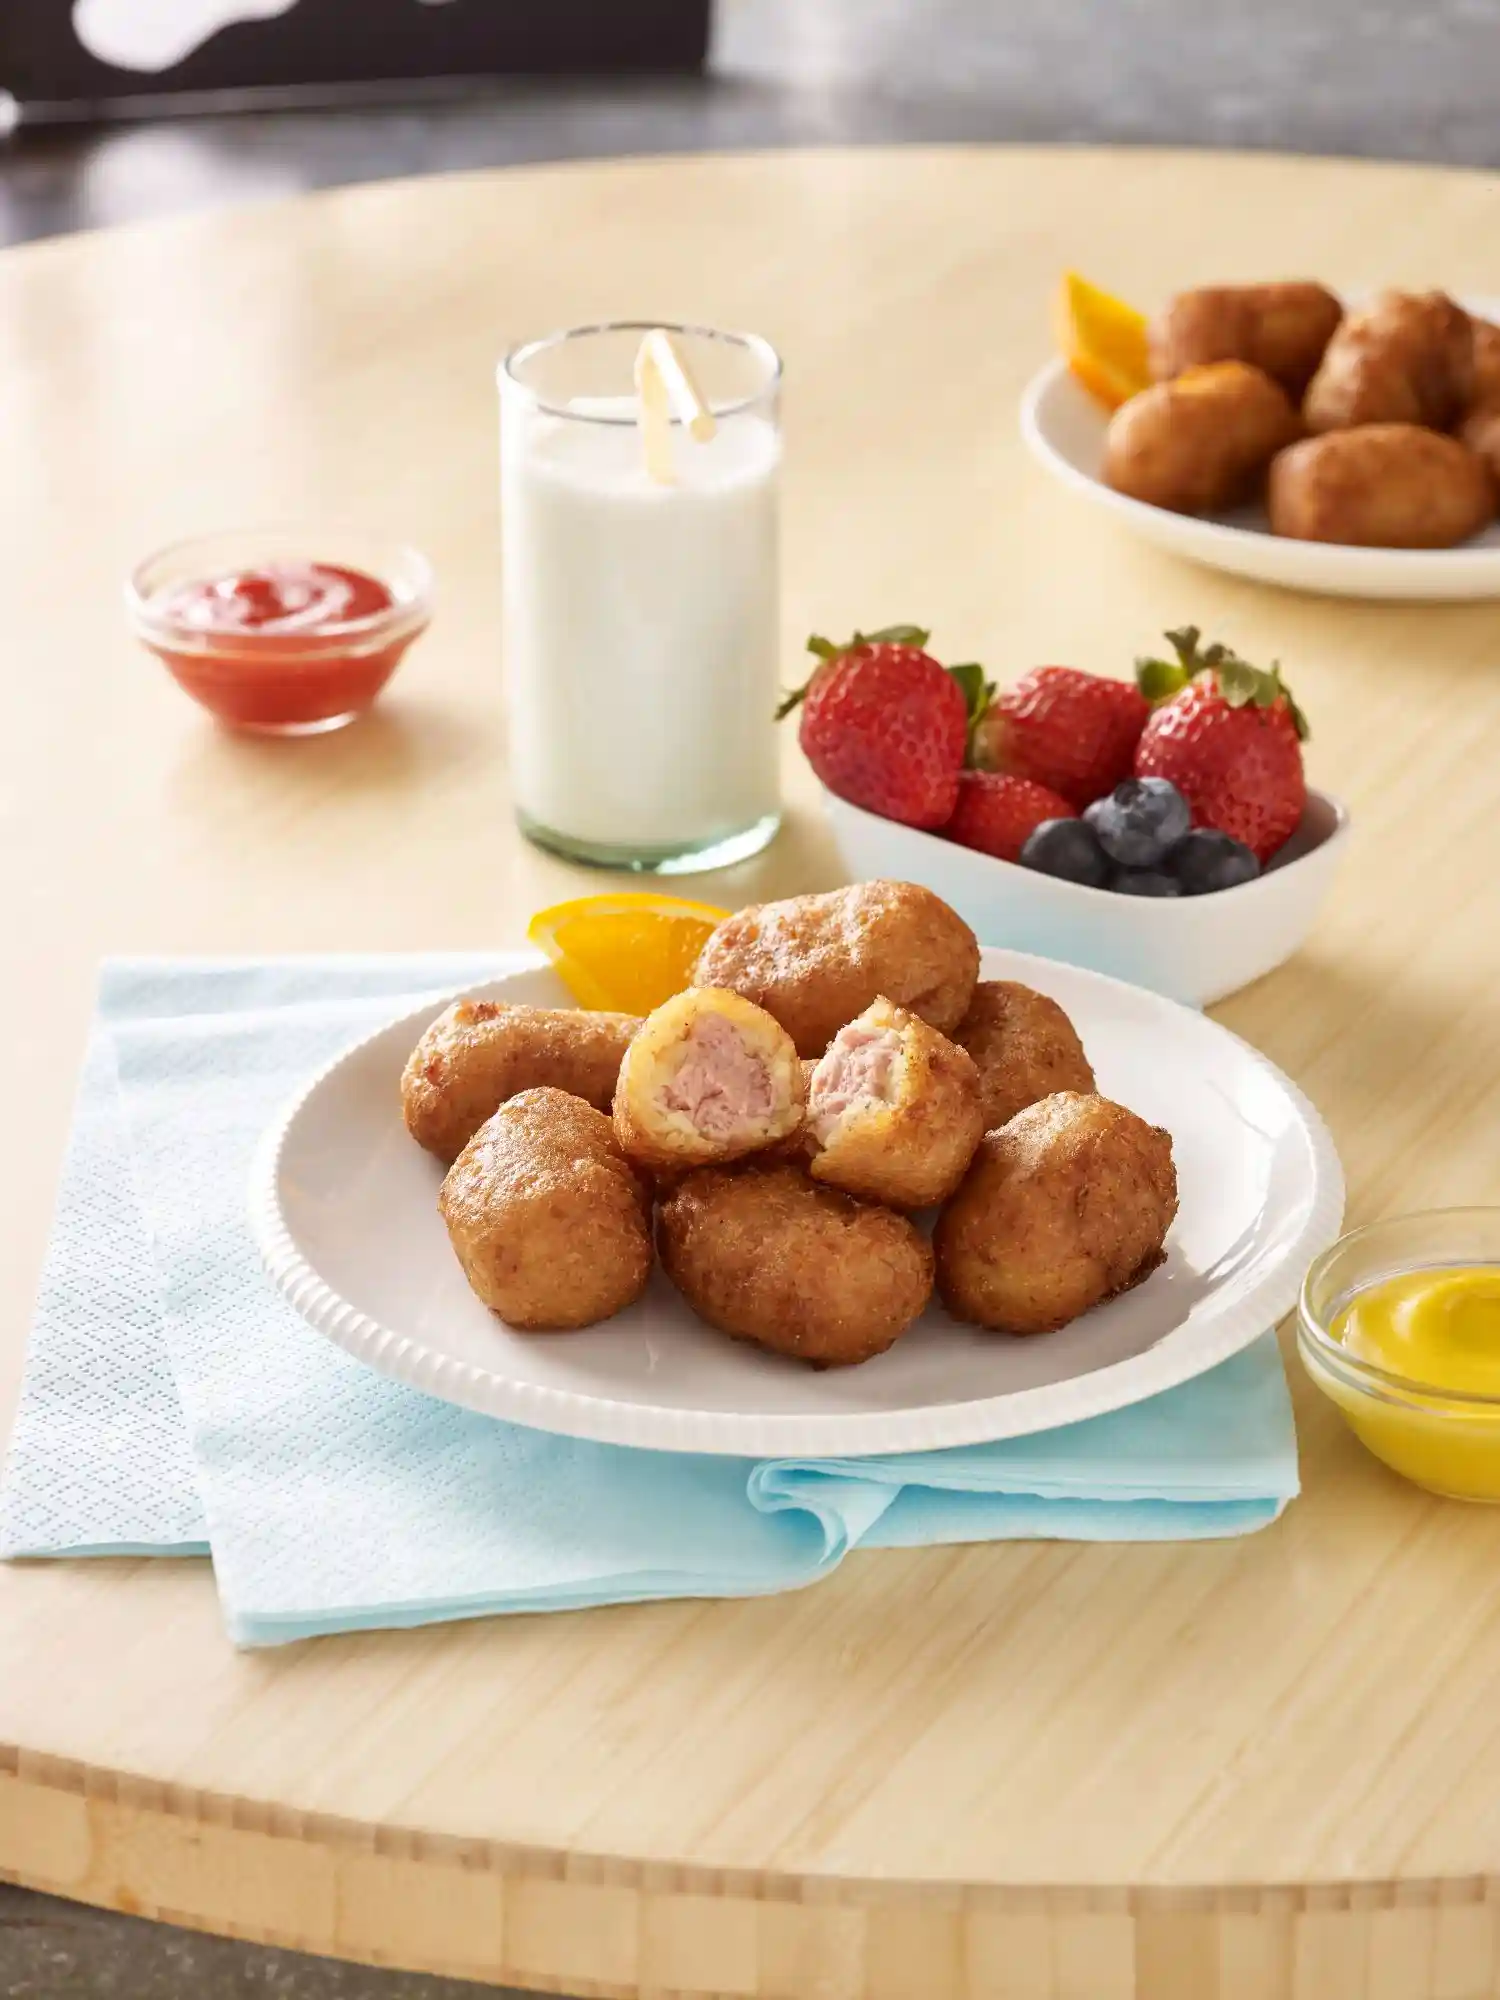 Tyson® Fully Cooked Whole Grain Breaded Mini Chicken Corn Dogs, CN, 0.67 oz. https://images.salsify.com/image/upload/s--PYUc0MZb--/q_25/g9vl5zcapaniwv8wpkwx.webp